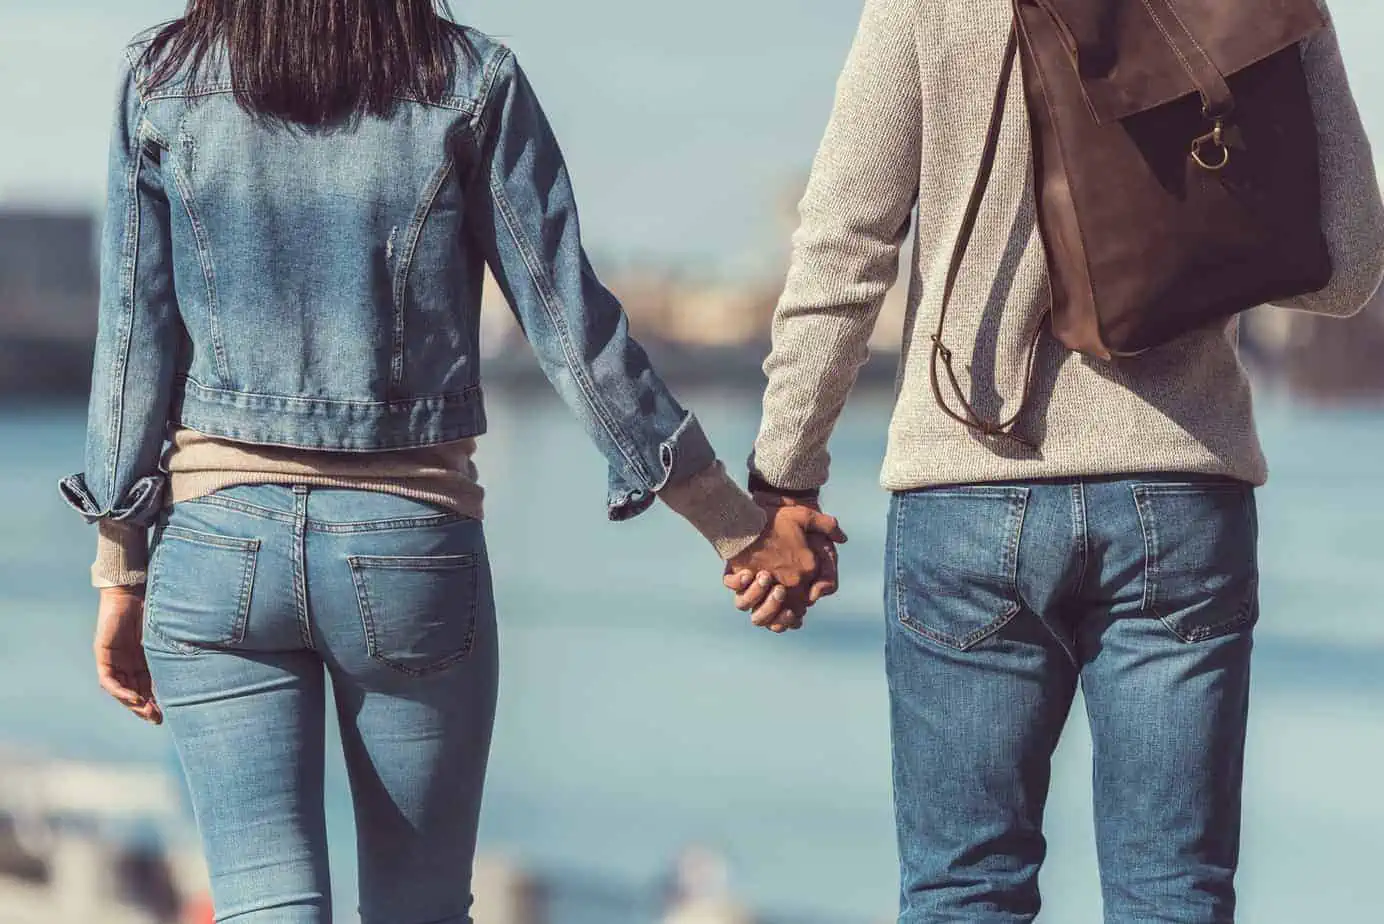 A man and a woman holding hands while walking by the water